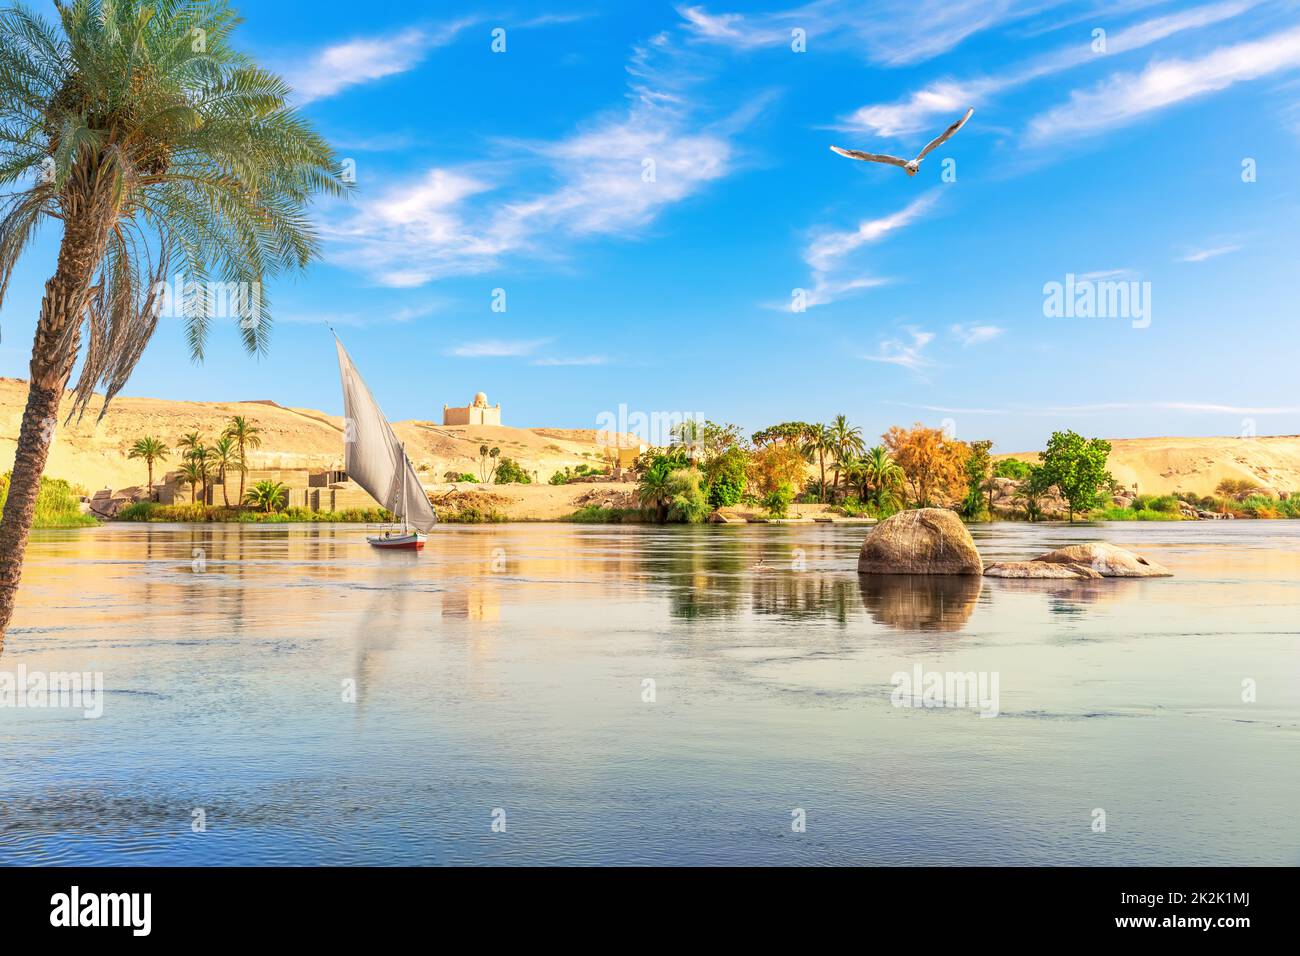 The Nile river picturesque scenery, Aswan city, Egypt Stock Photo